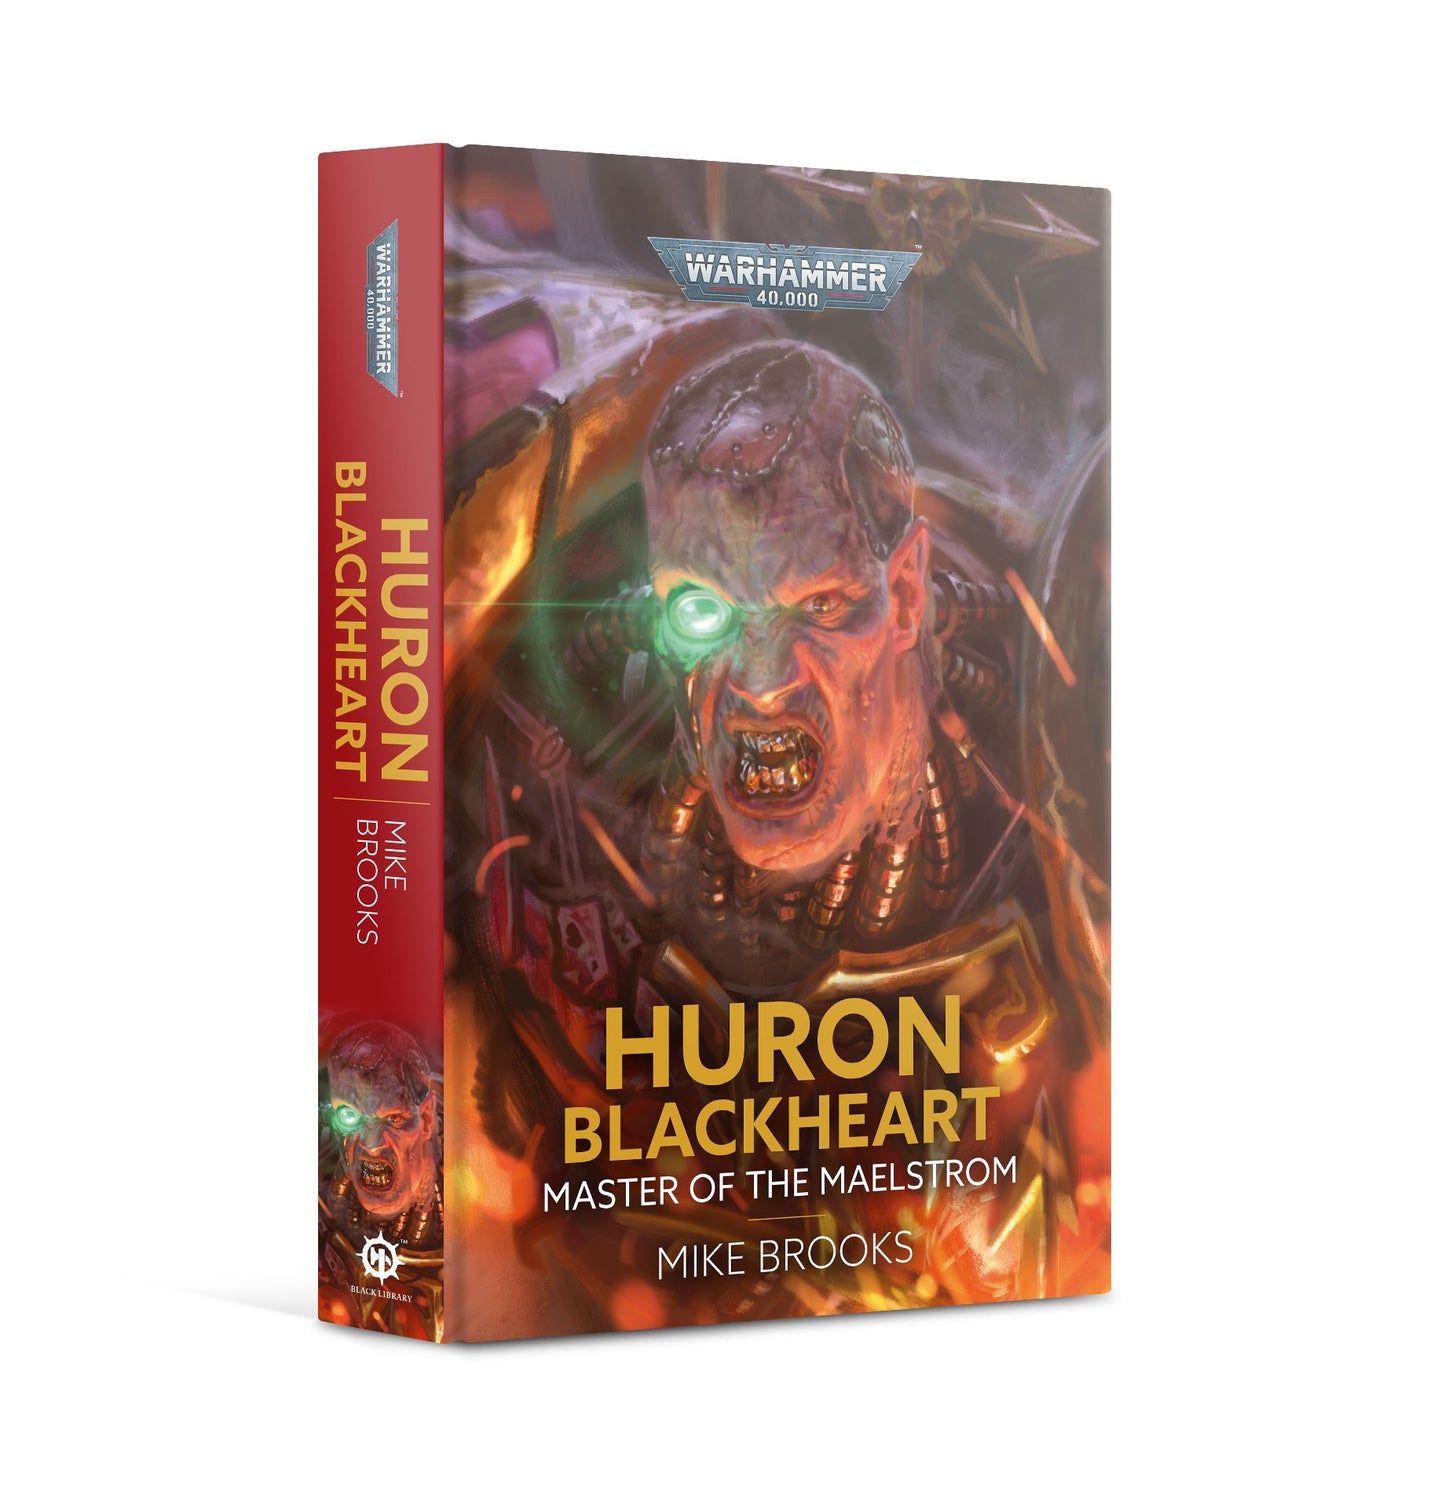 40K HURON BLACKHEART MASTER OF THE MAELSTROM BY MIKE BROOKS HC